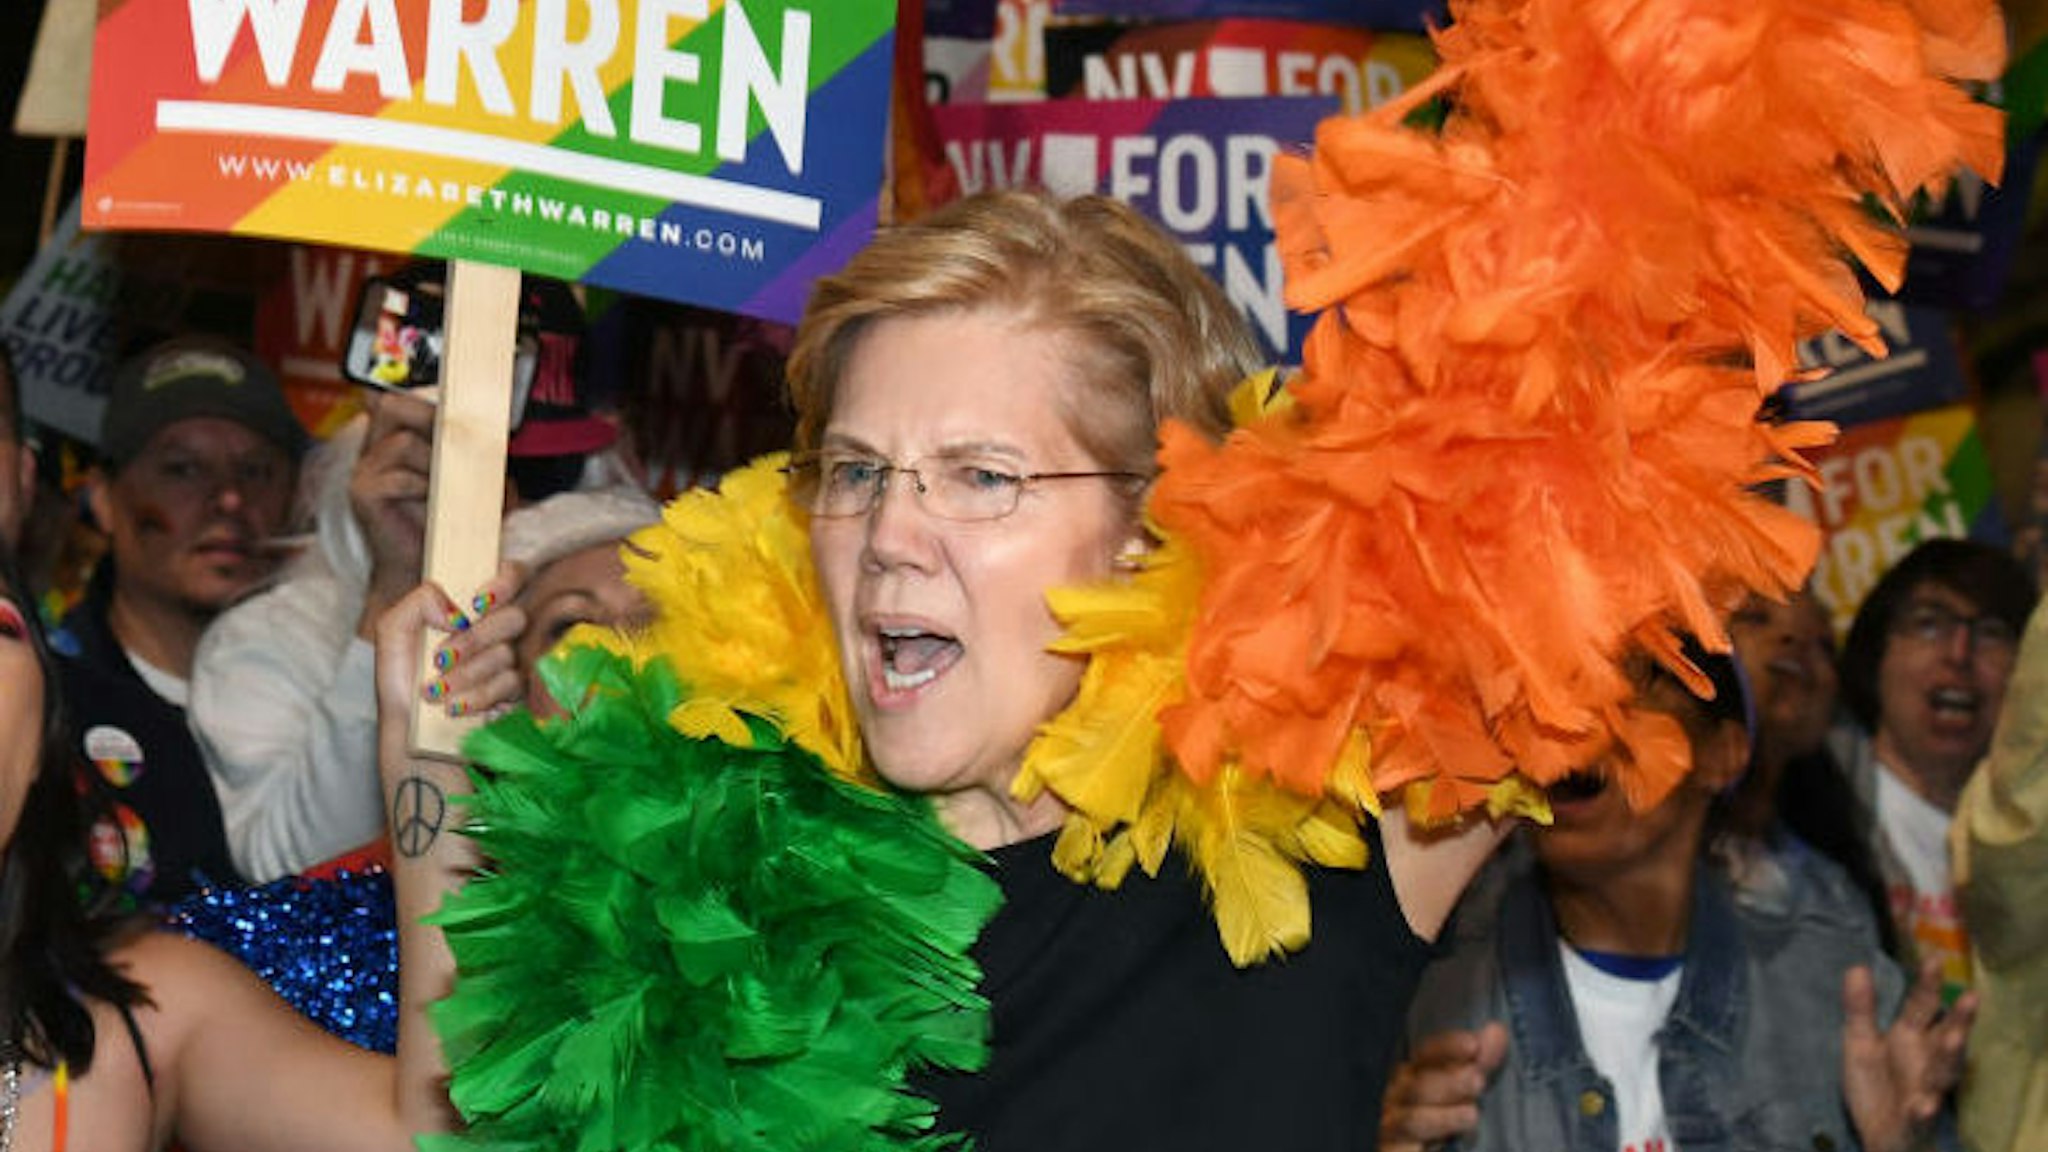 Democratic presidential candidate and U.S. Sen. Elizabeth Warren (D-MA) (R) marches with supporters in the Southern Nevada Association of Pride Inc. 22nd annual PRIDE Night Parade on October 11, 2019 in Las Vegas, Nevada. Recent national presidential primary polls show Warren in a tight race for the top spot with former U.S. Vice President Joe Biden for the 2020 Democratic Party nomination heading into Tuesday's debate. (Photo by Ethan Miller/Getty Images)